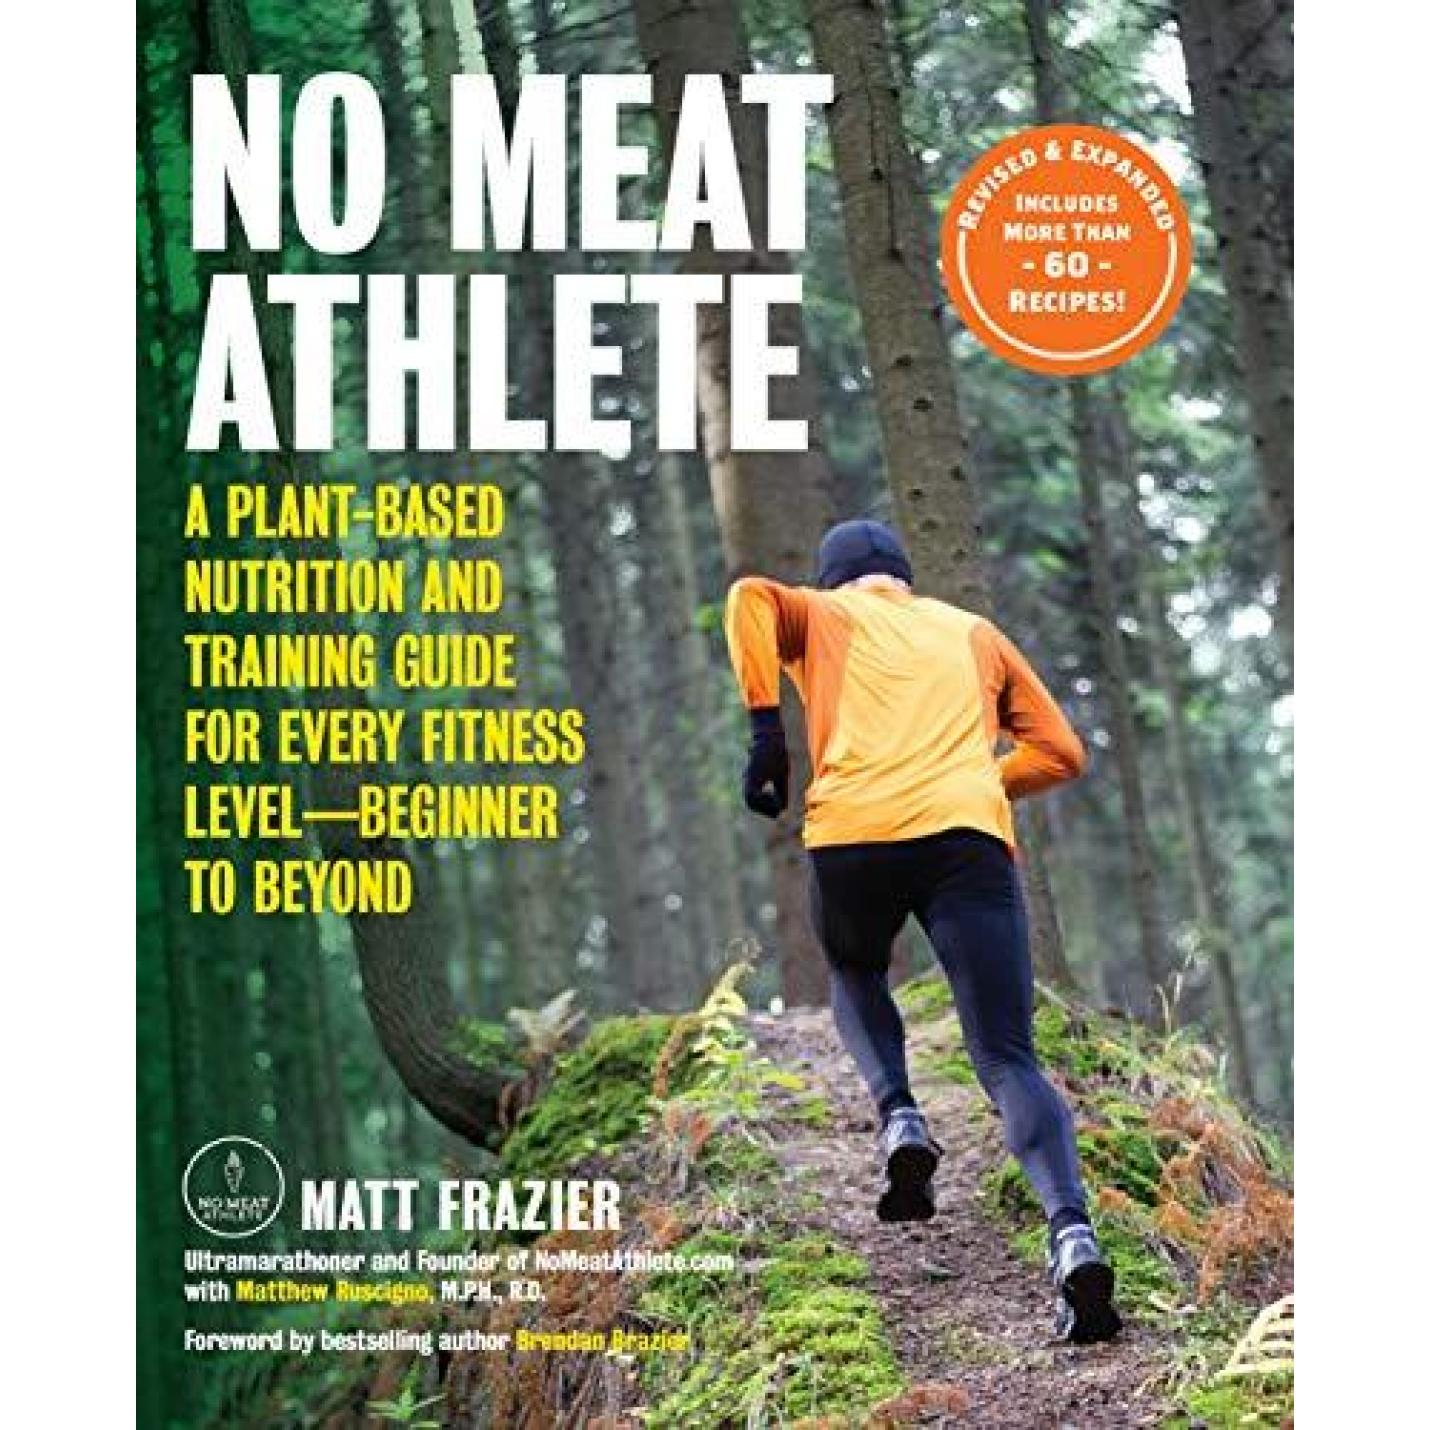 Frazier, M: No Meat Athlete, Revised and Expanded: A Plant-Based Nutrition and Training Guide for Every Fitness Level?Beginner to Beyond [Includes More Than 60 Recipes!] Paperback